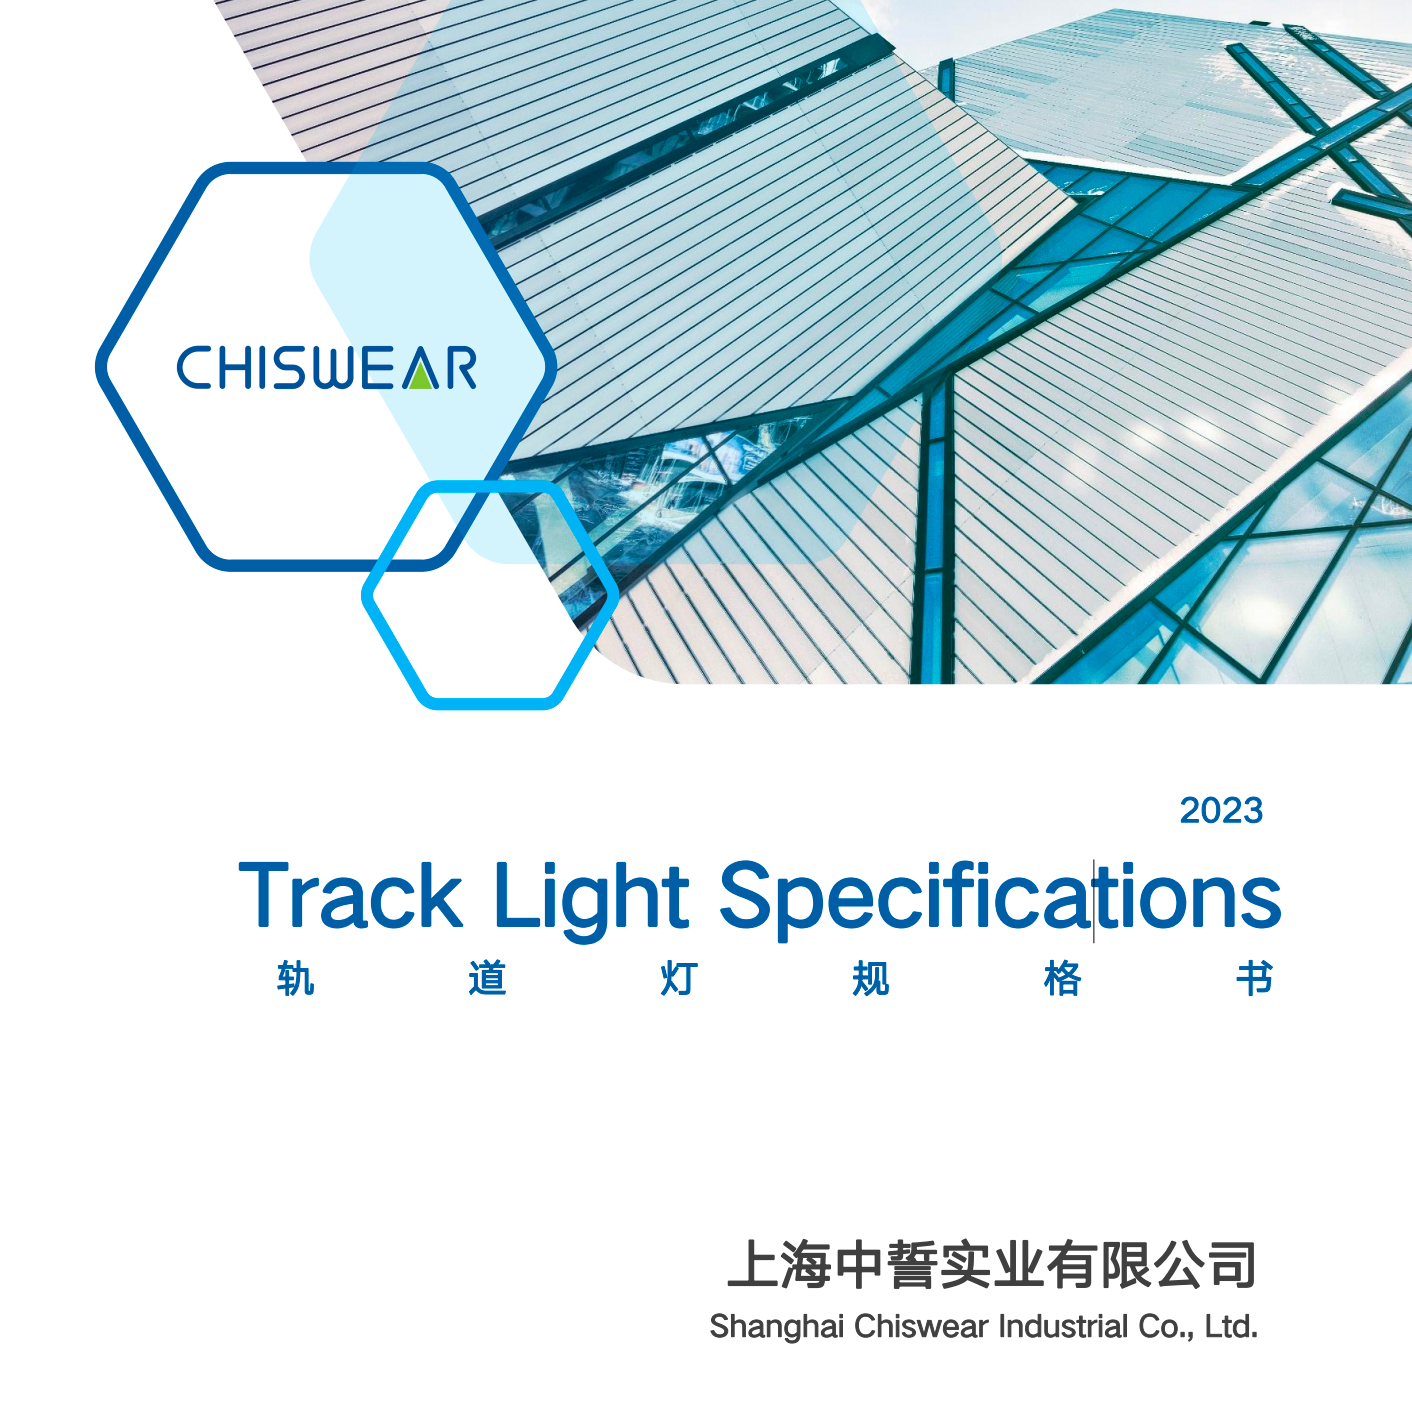 2023 Chiswear Track Light Specifications